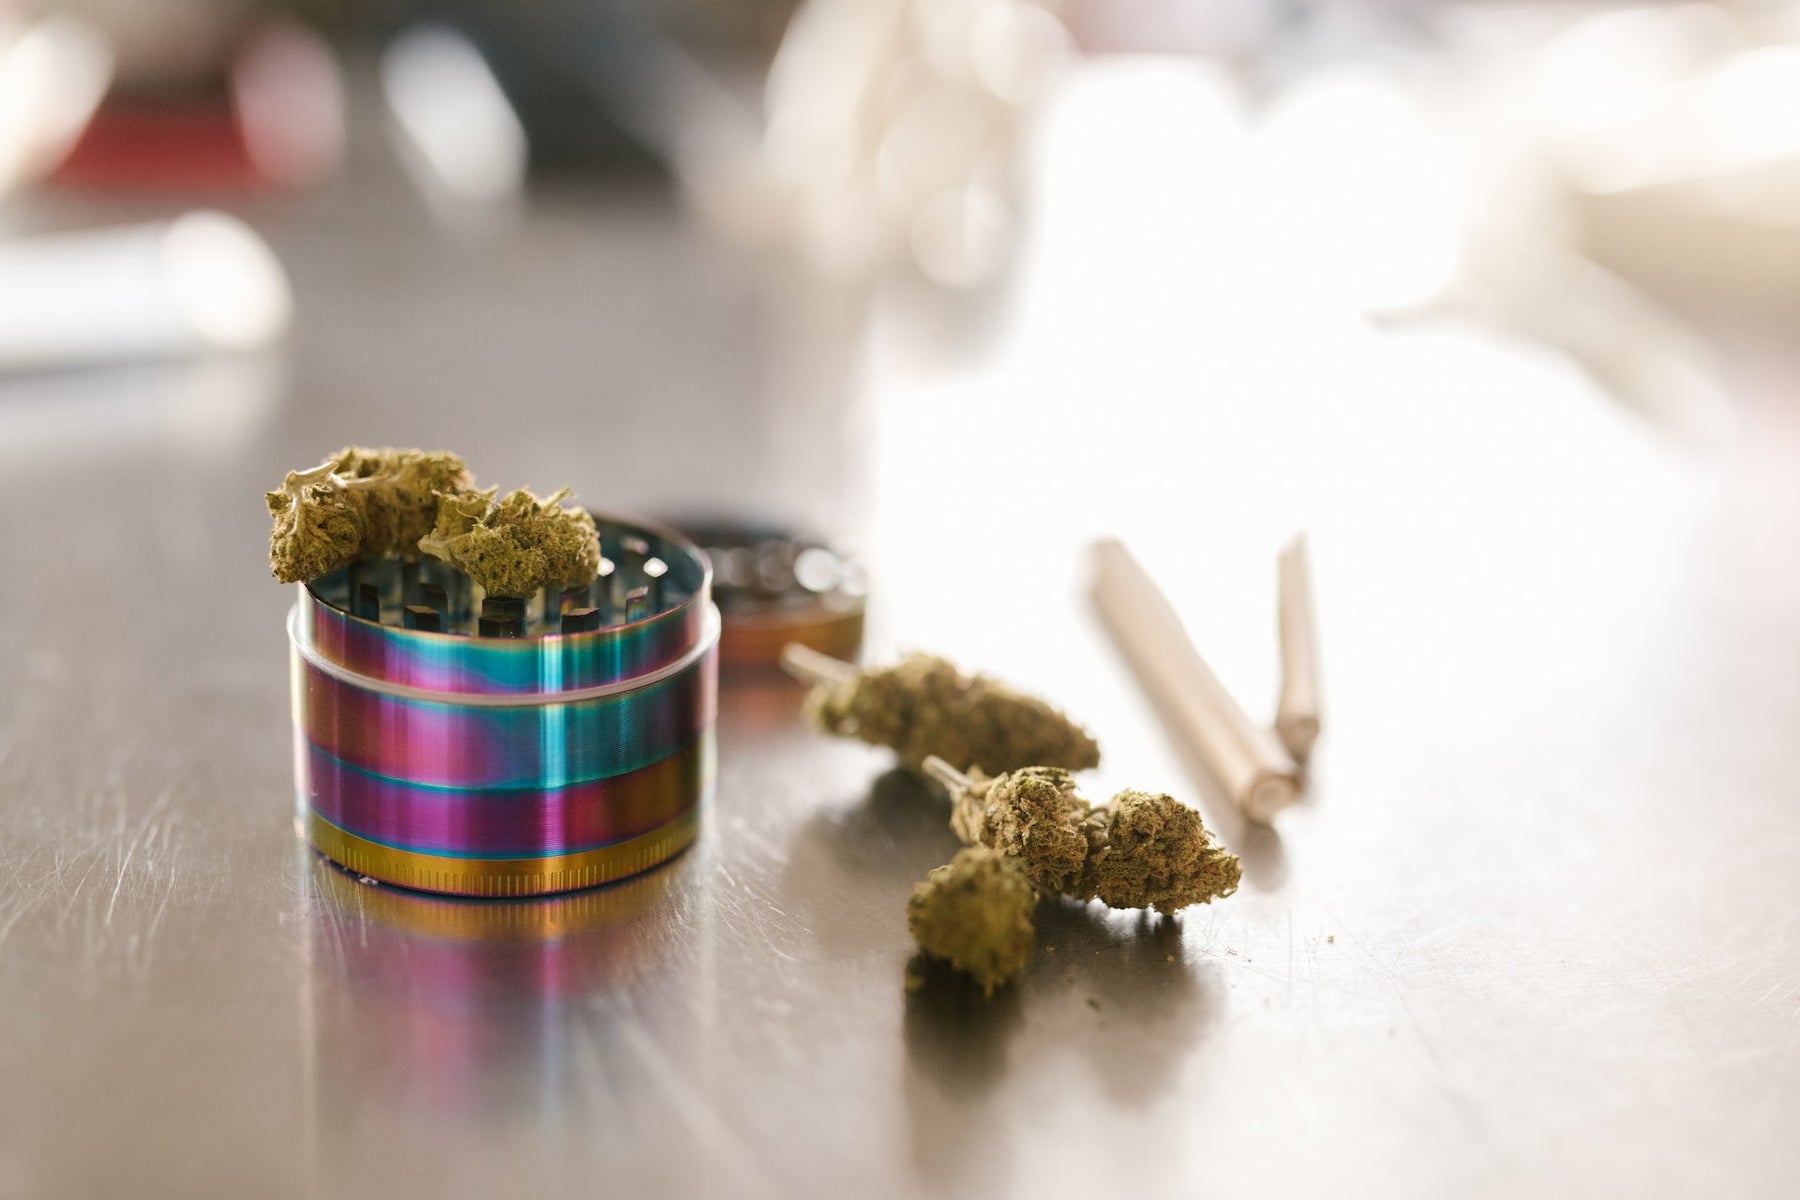 How To Grind Marijuana Without A Grinder